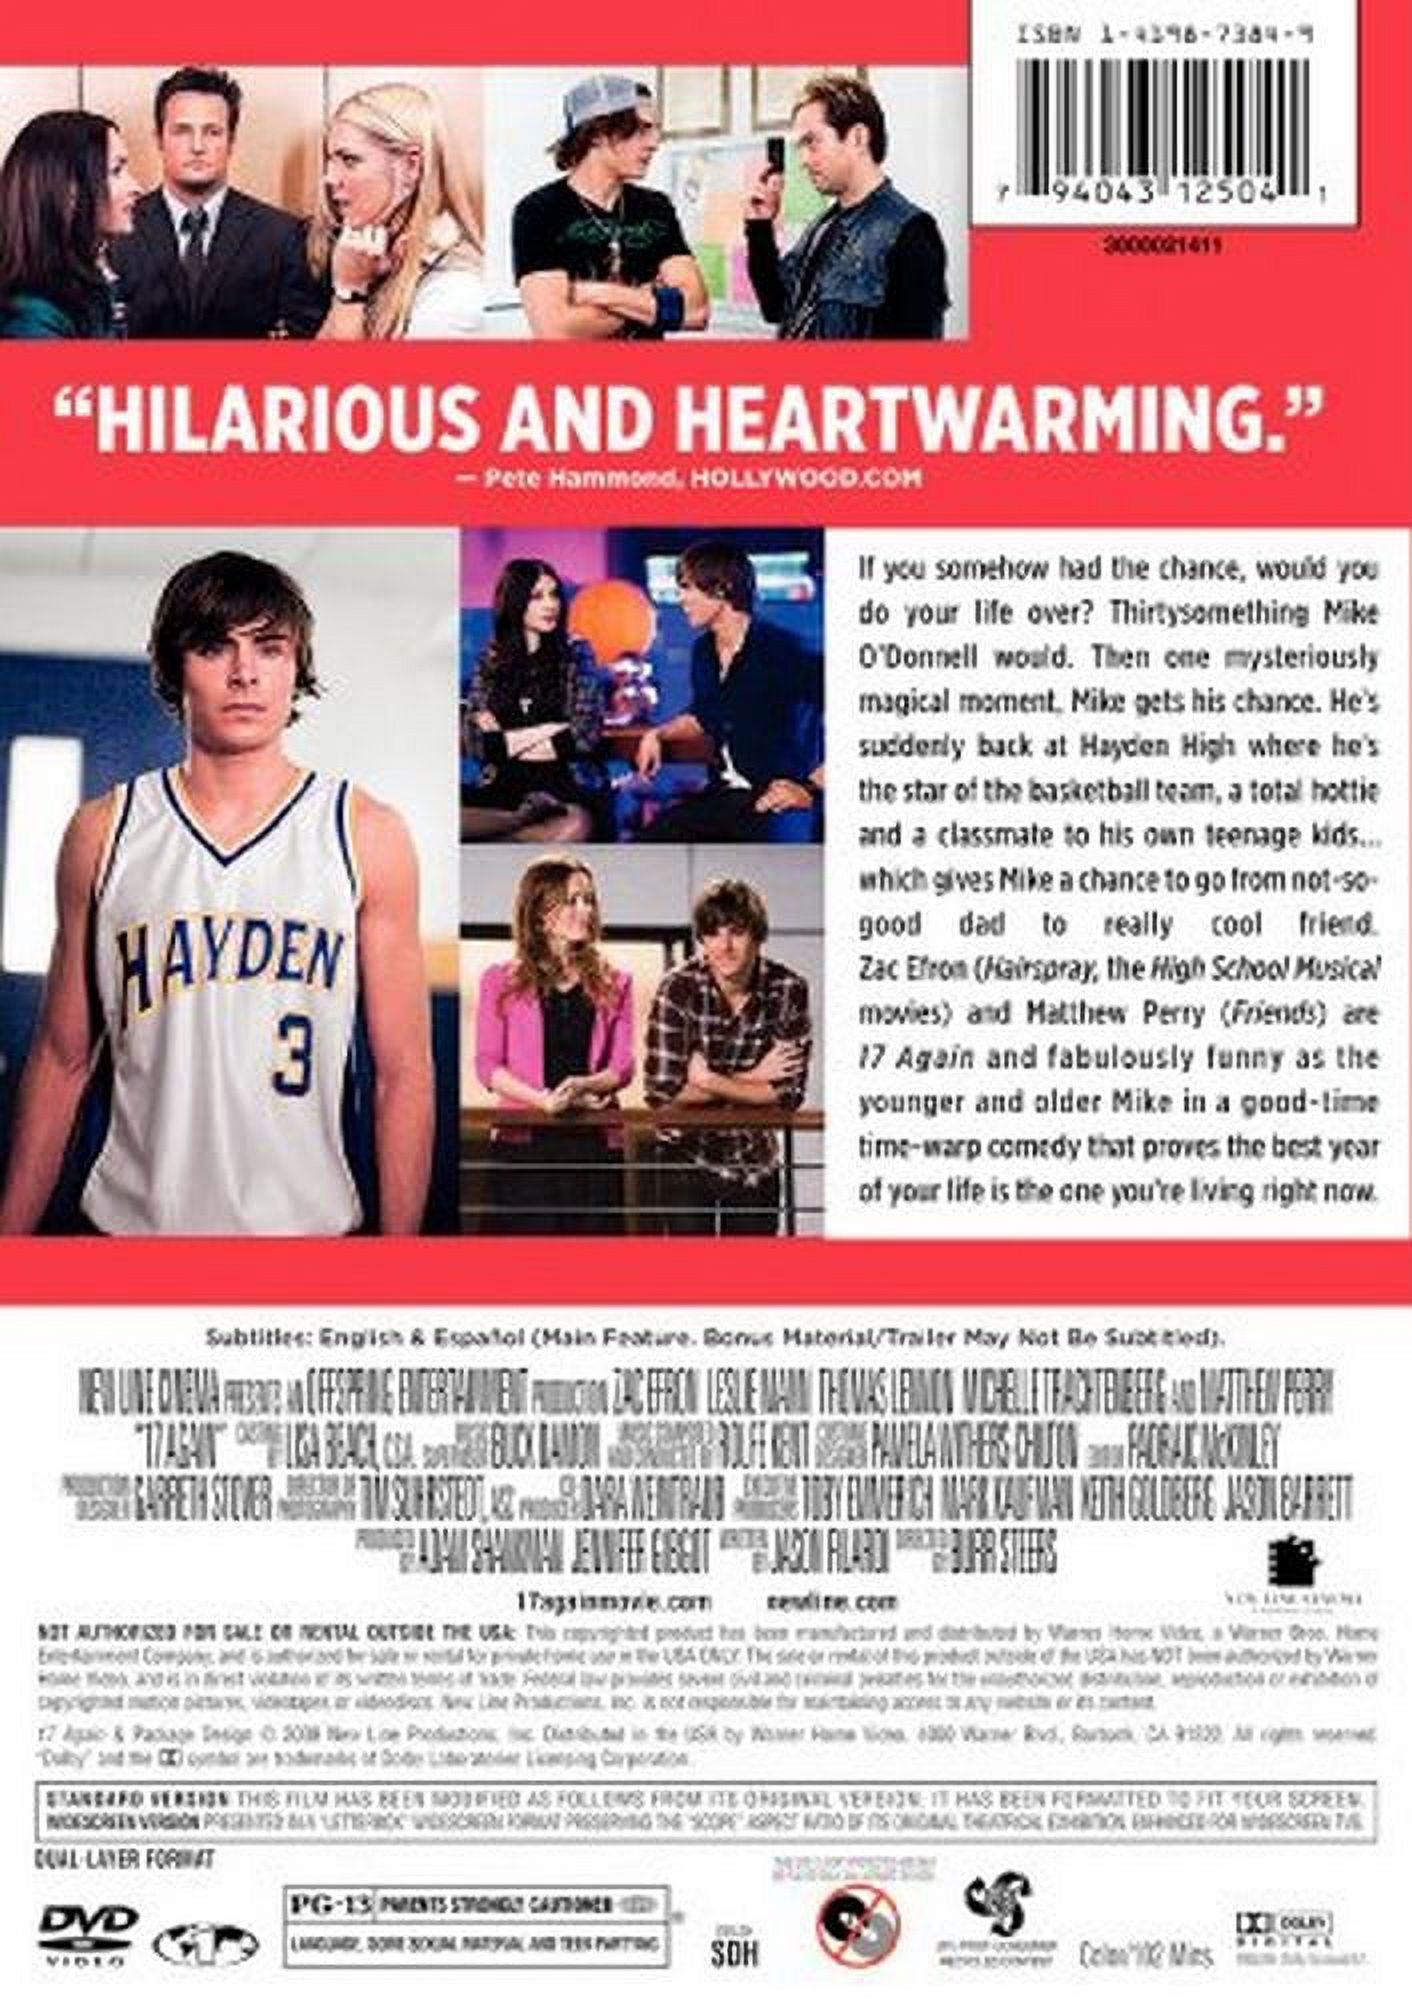 17 Again (DVD), New Line Home Video, Comedy - image 2 of 2